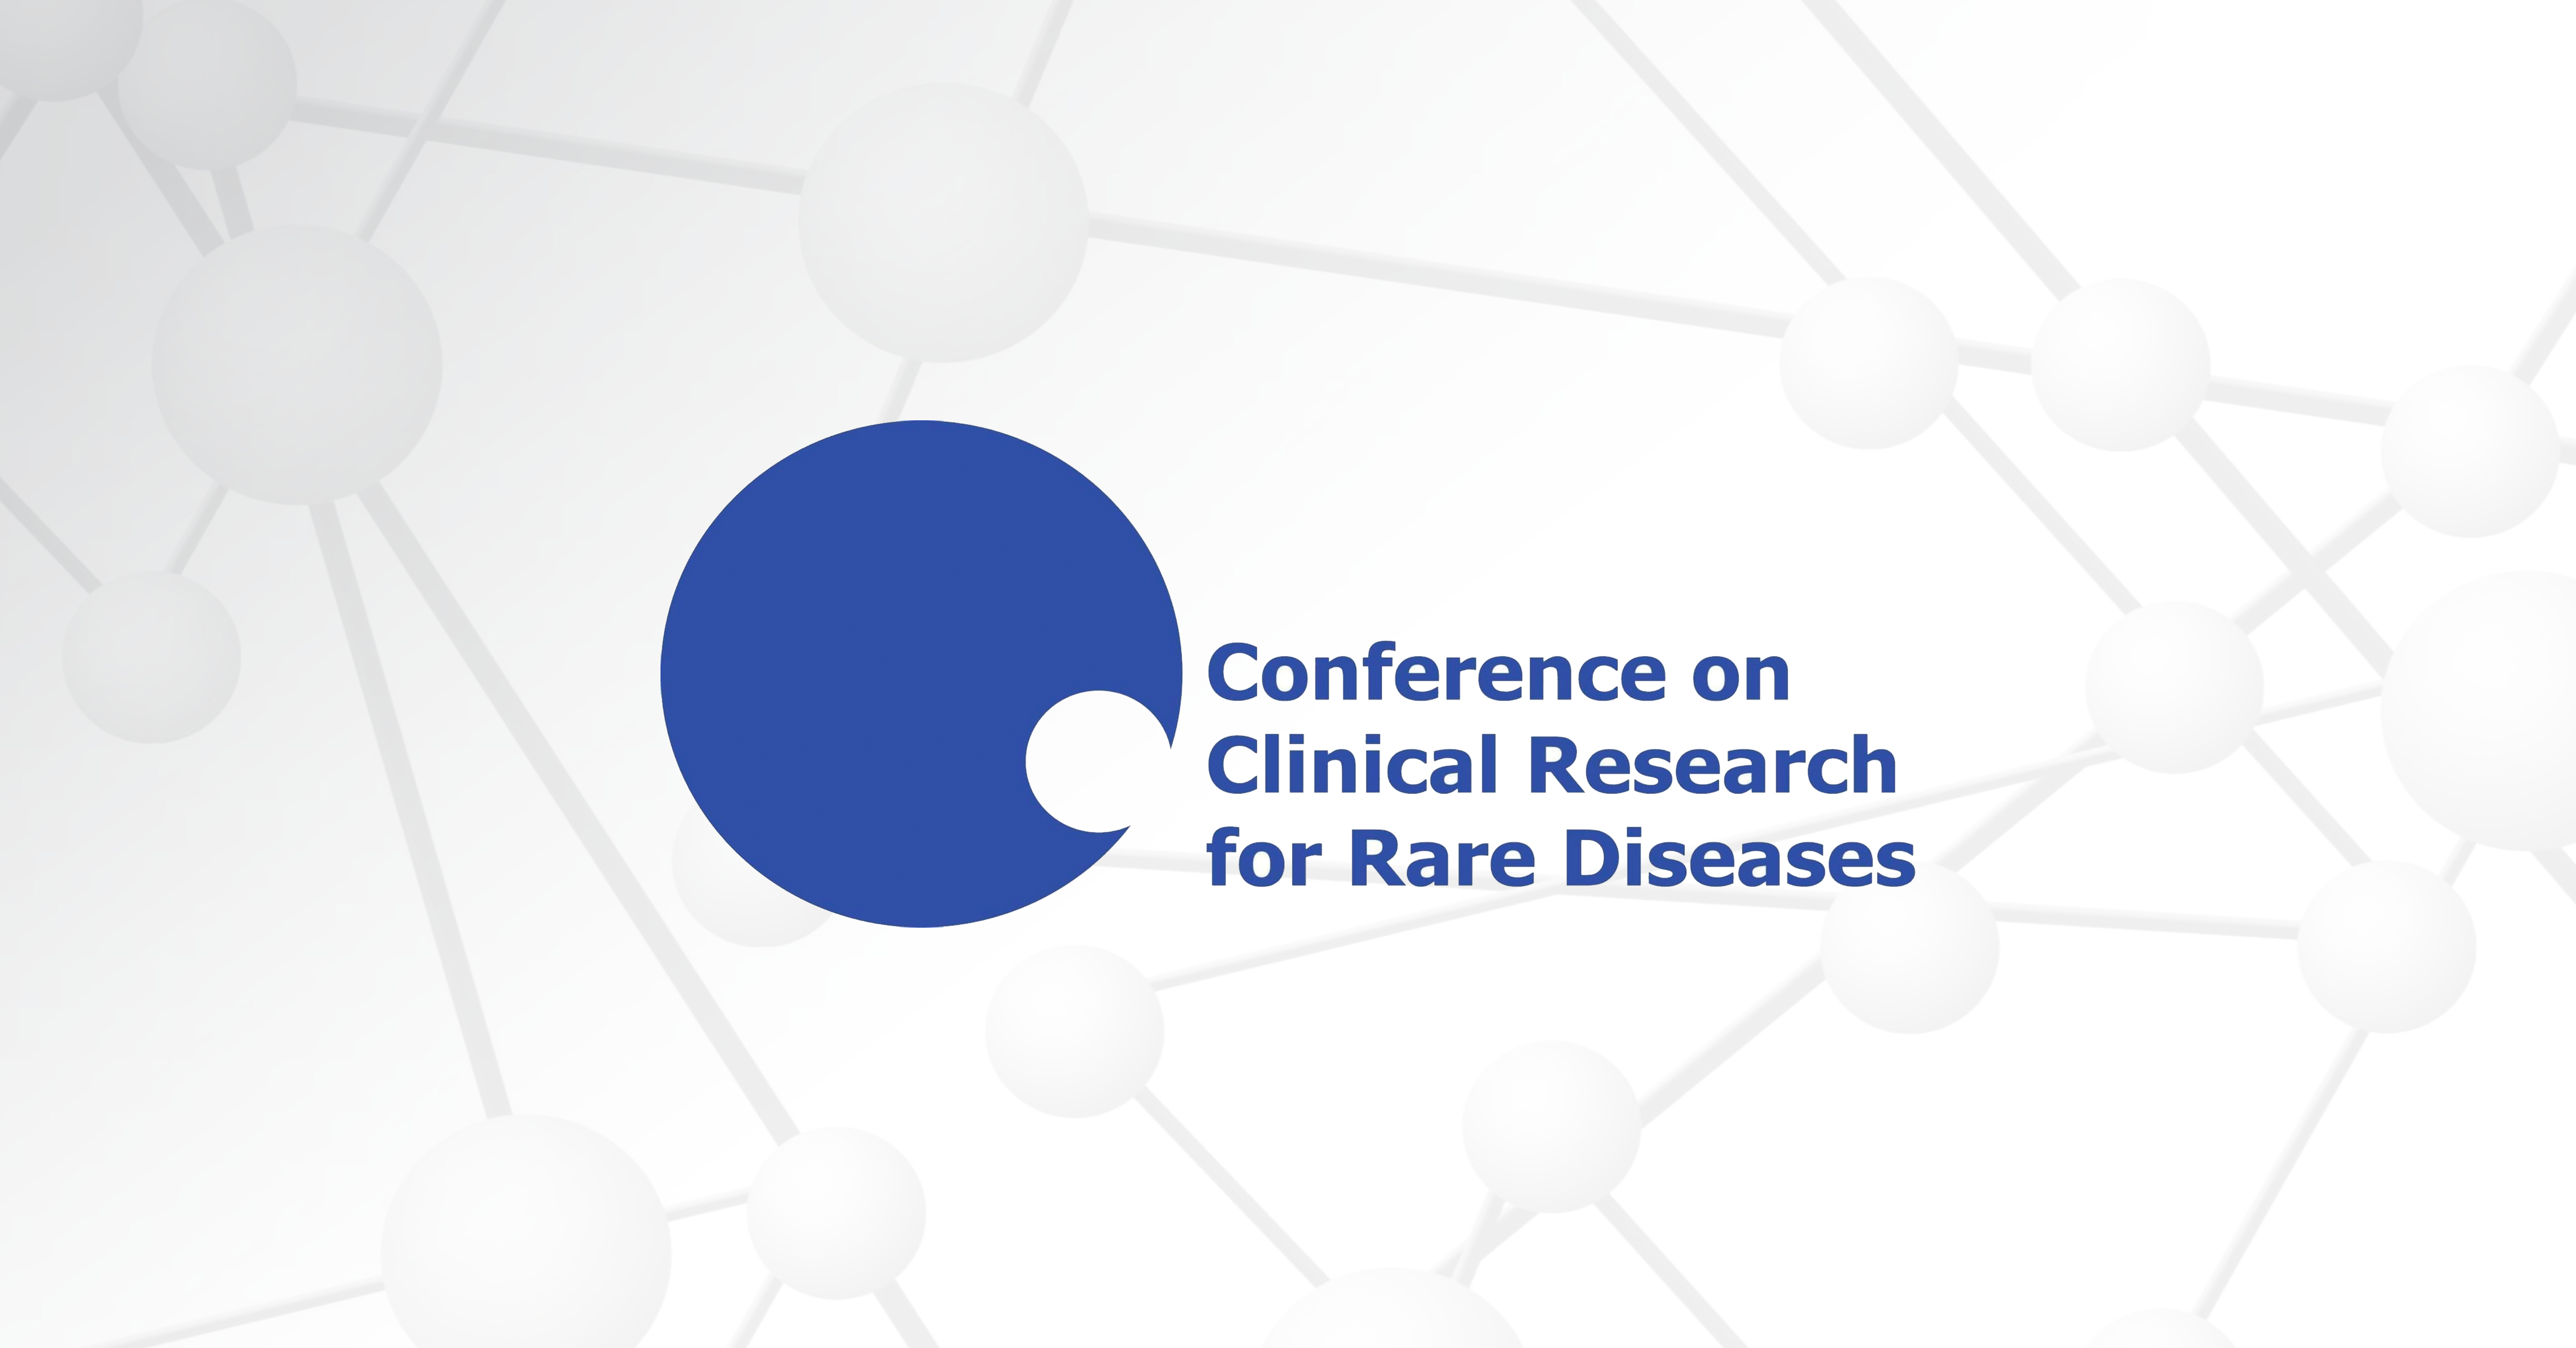 The Conference on Clinical Research for Rare Diseases logo appears over a gray graphic of molecules